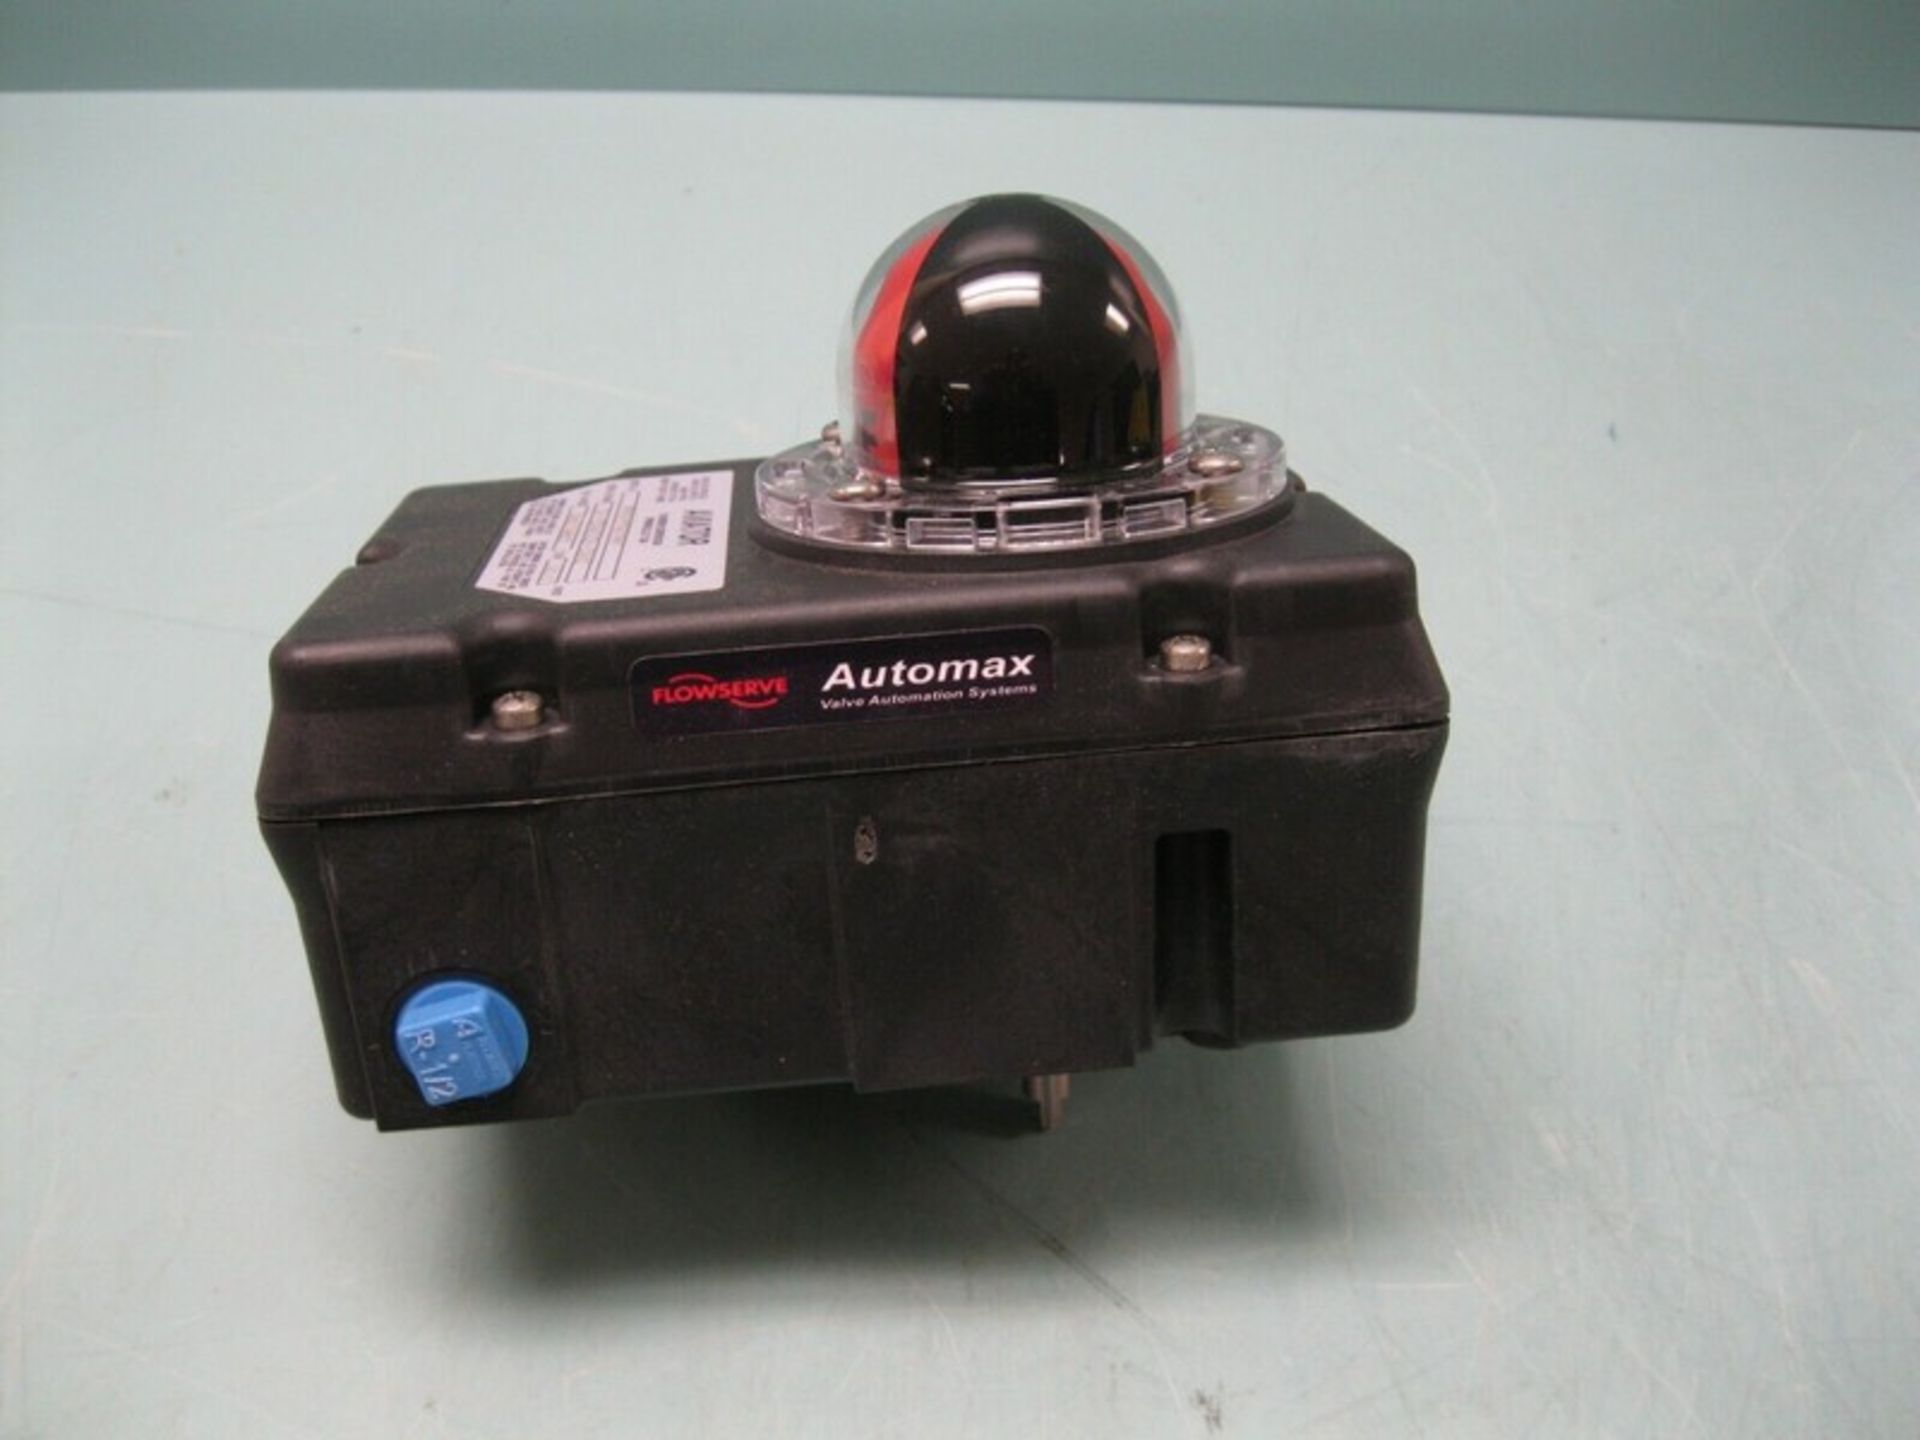 Flowserve Automax Aviator WRUPP0G1NR Valve Controller NEW (NOTE: Packing and Palletizing Can Be - Image 2 of 6